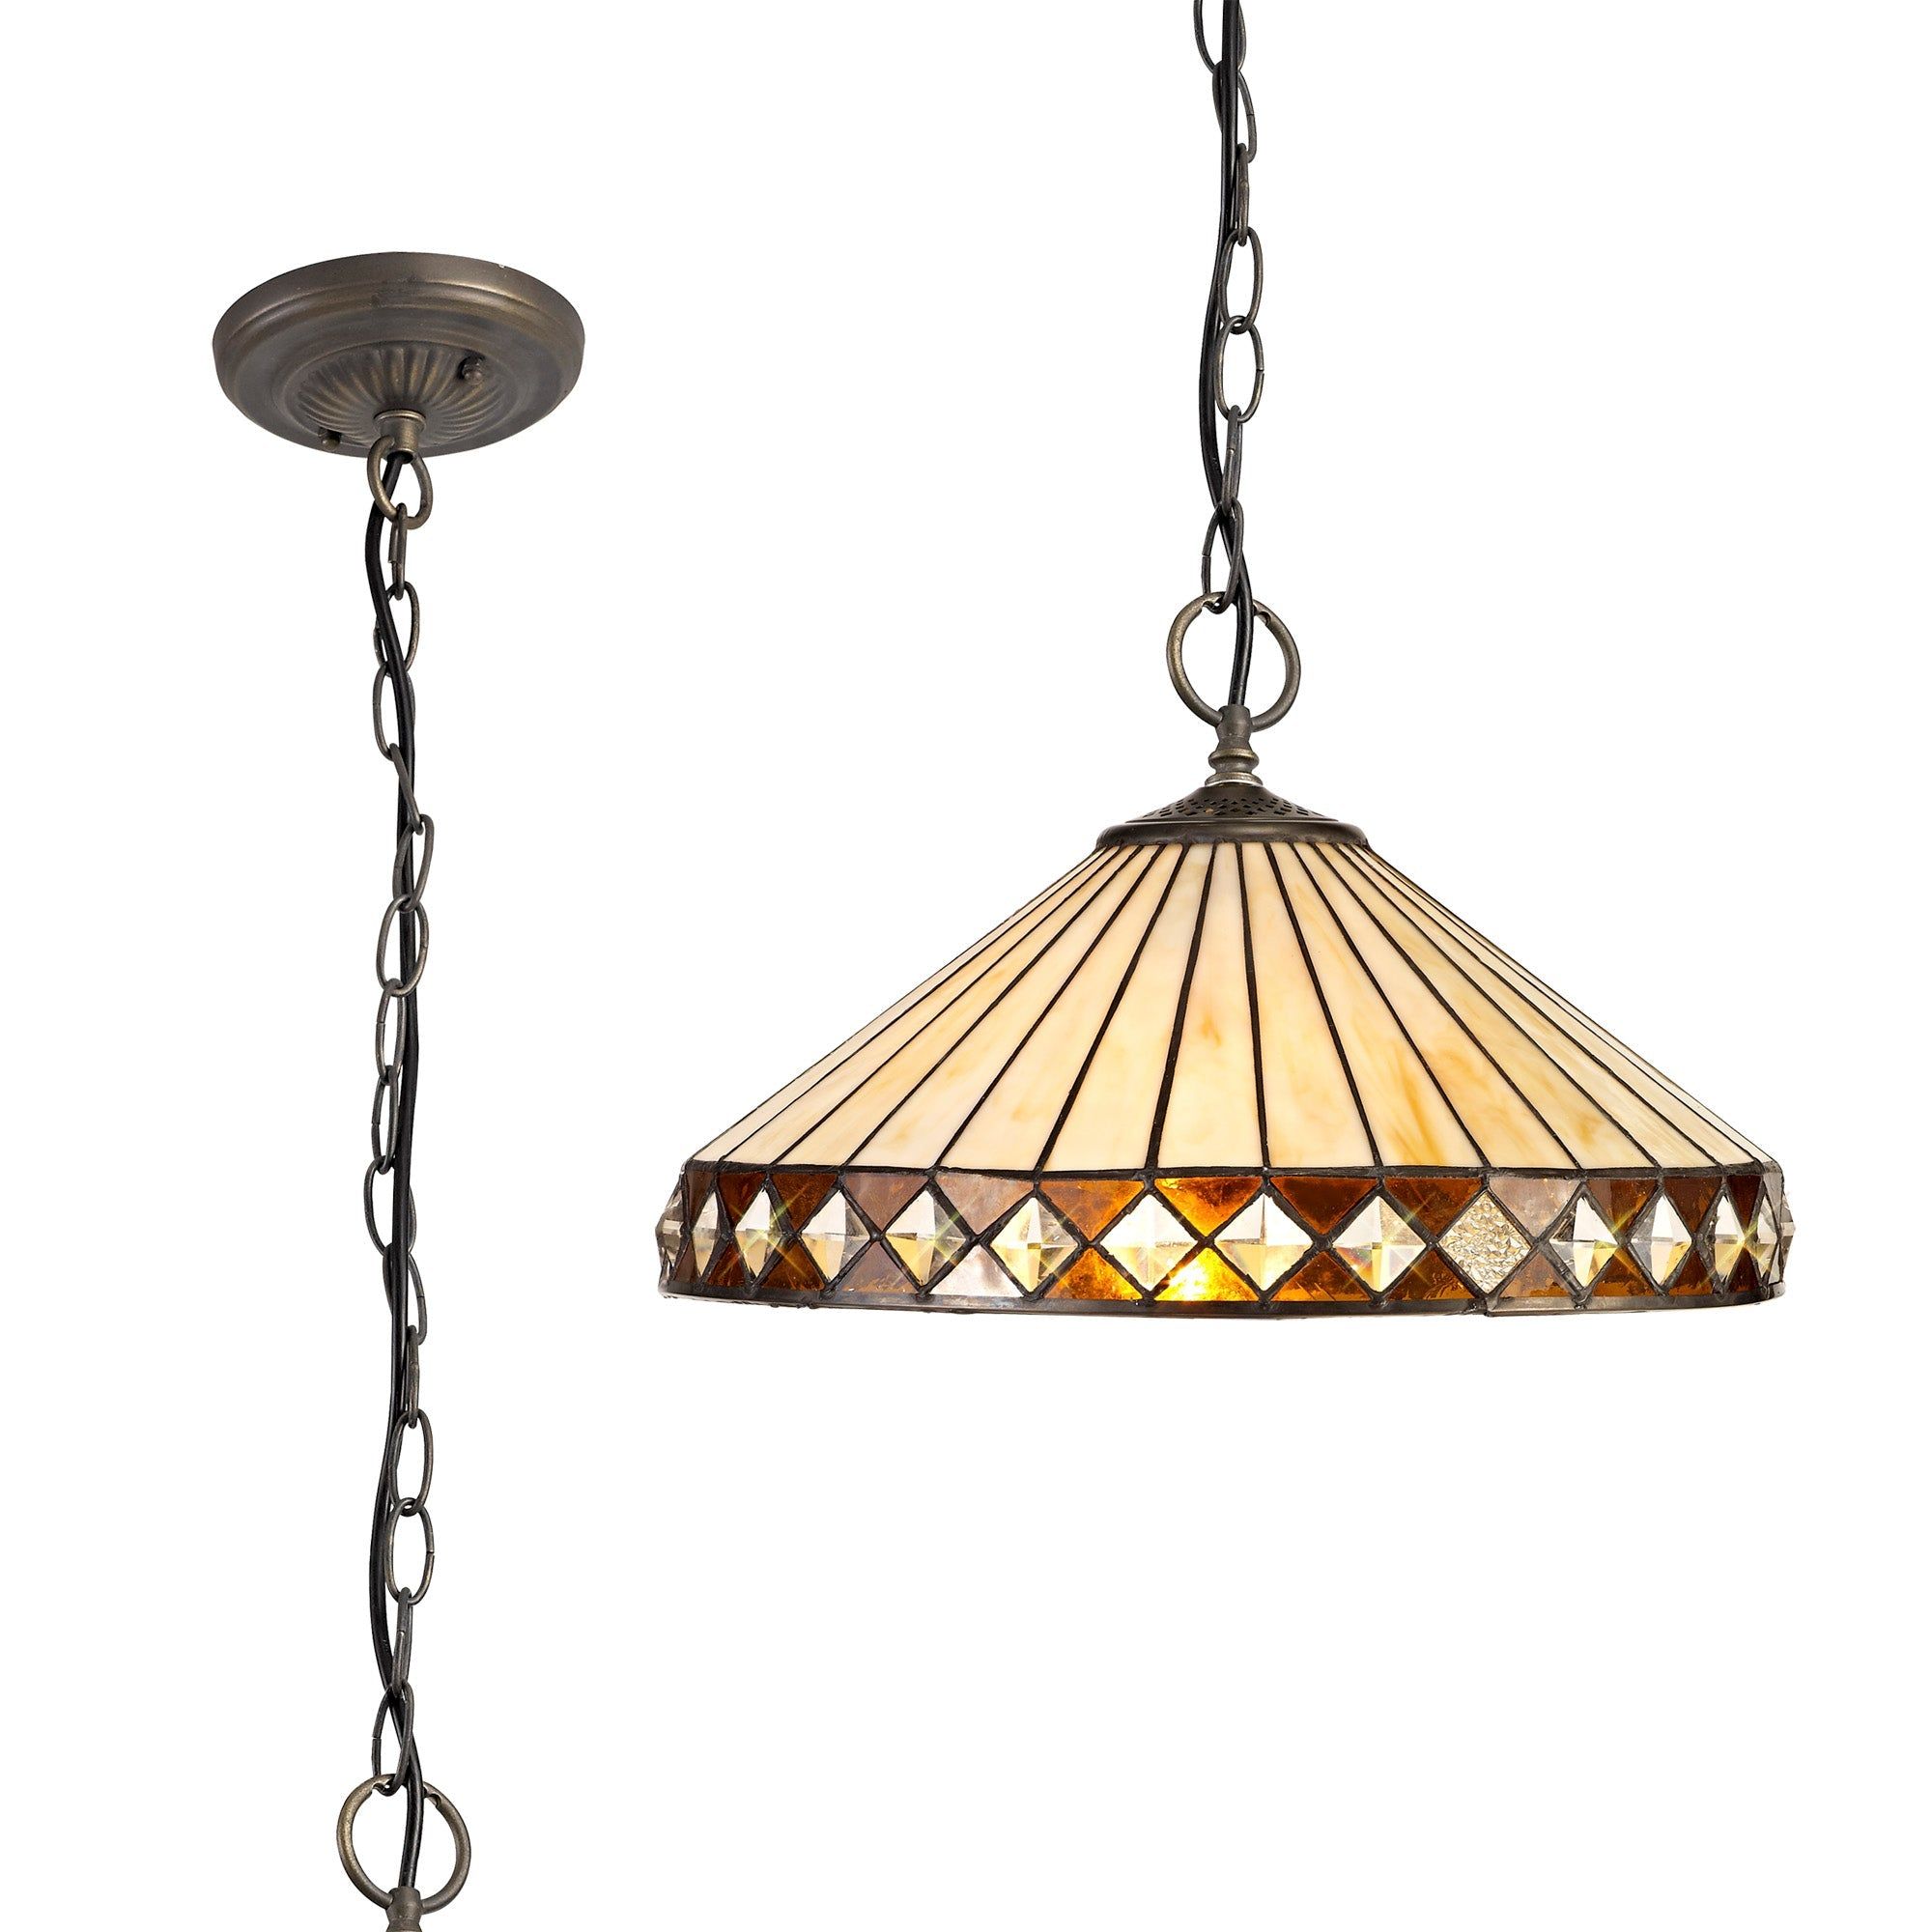 Isrmian 1 Light Downlighter Pendant E27 With 30cm Tiffany Shade, Amber/Cream/Crystal/Aged Antique Brass